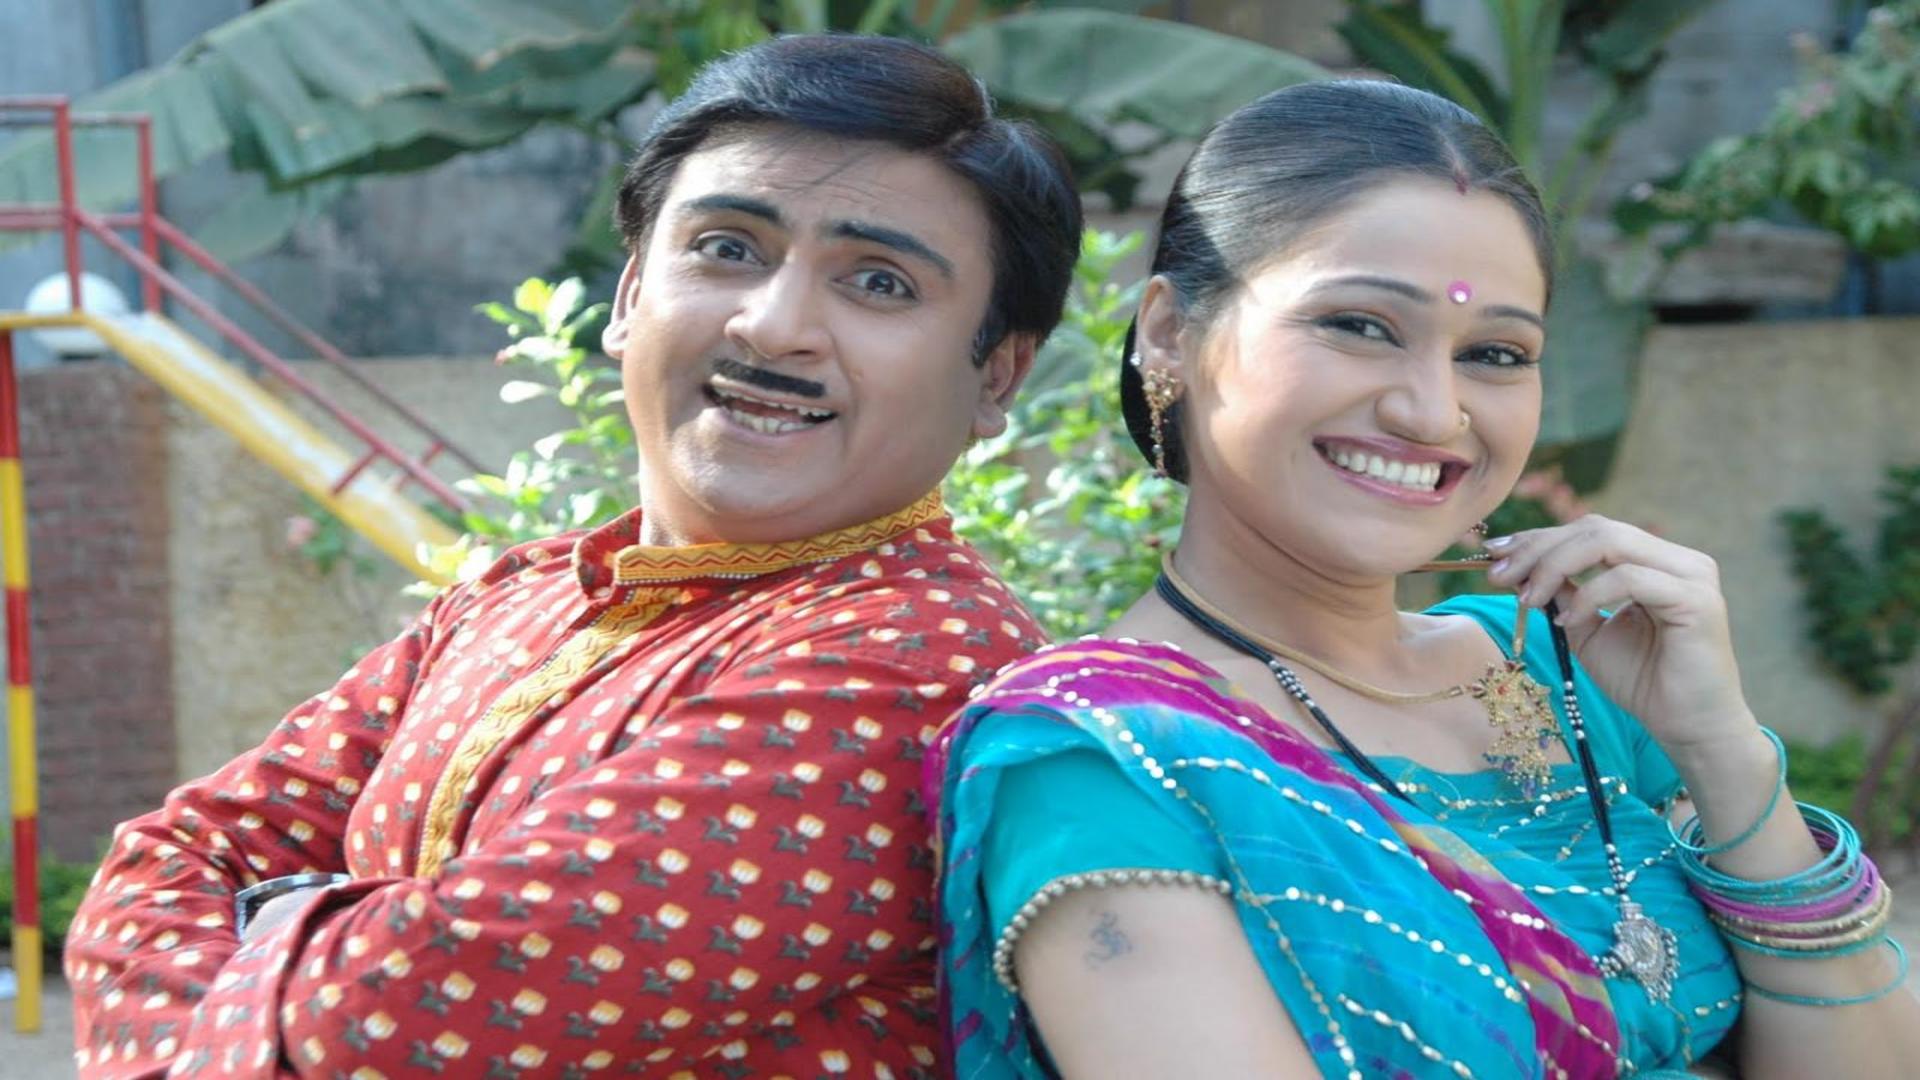 Taarak Mehta Ka Ooltah Chashmah Episodes Tv Series 2008 2016 Drama serial is production of neela tele films private limited and is directed by harshad joshi. taarak mehta ka ooltah chashmah